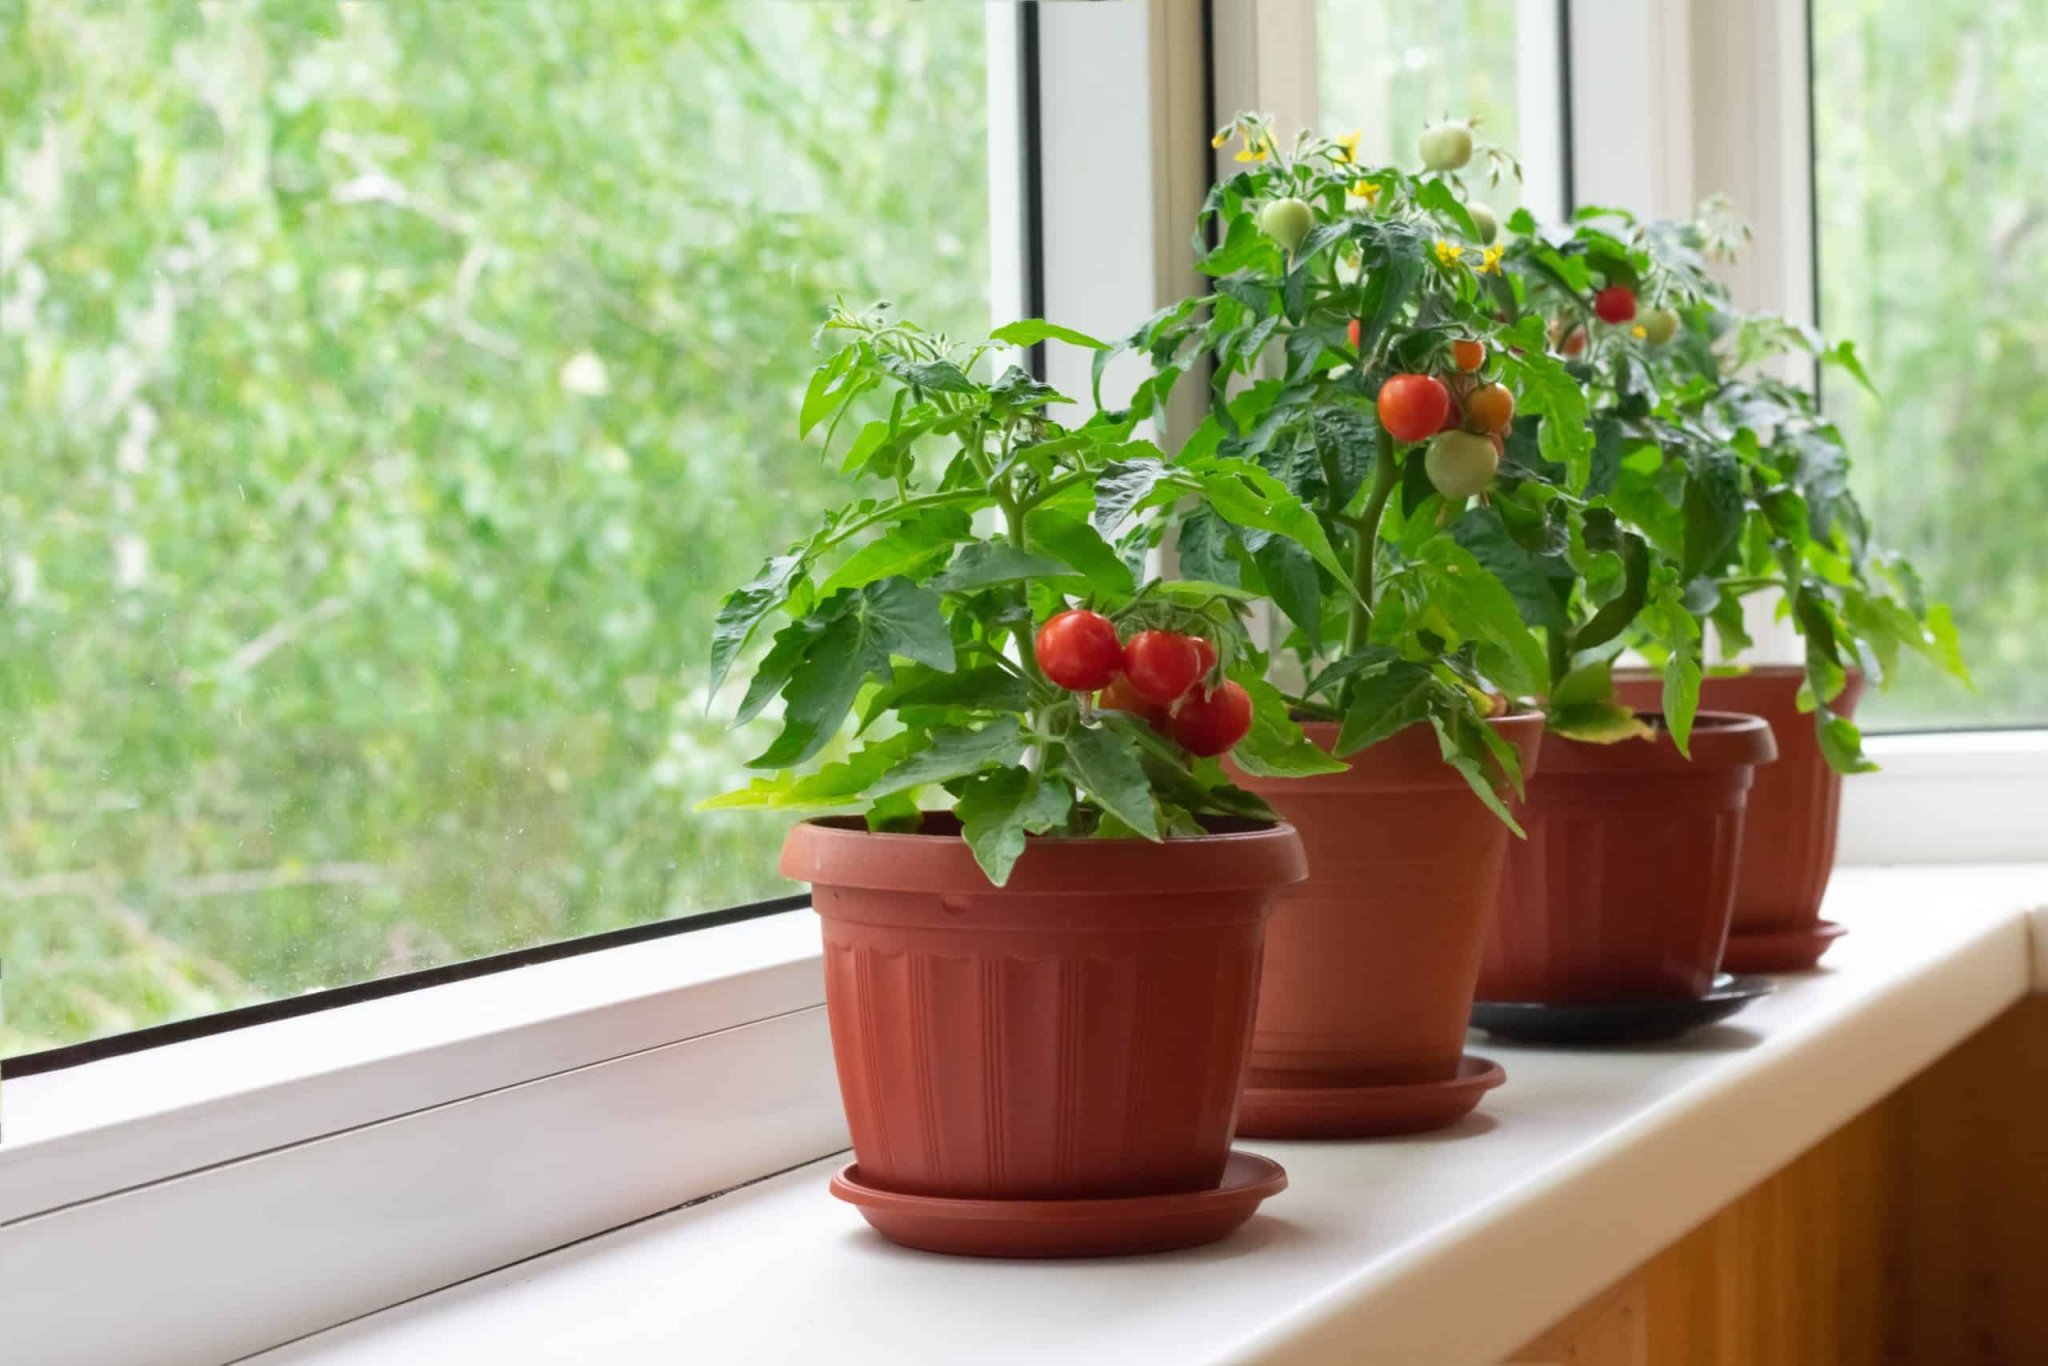 What Potting Soil is Best For Vegetables in Containers?